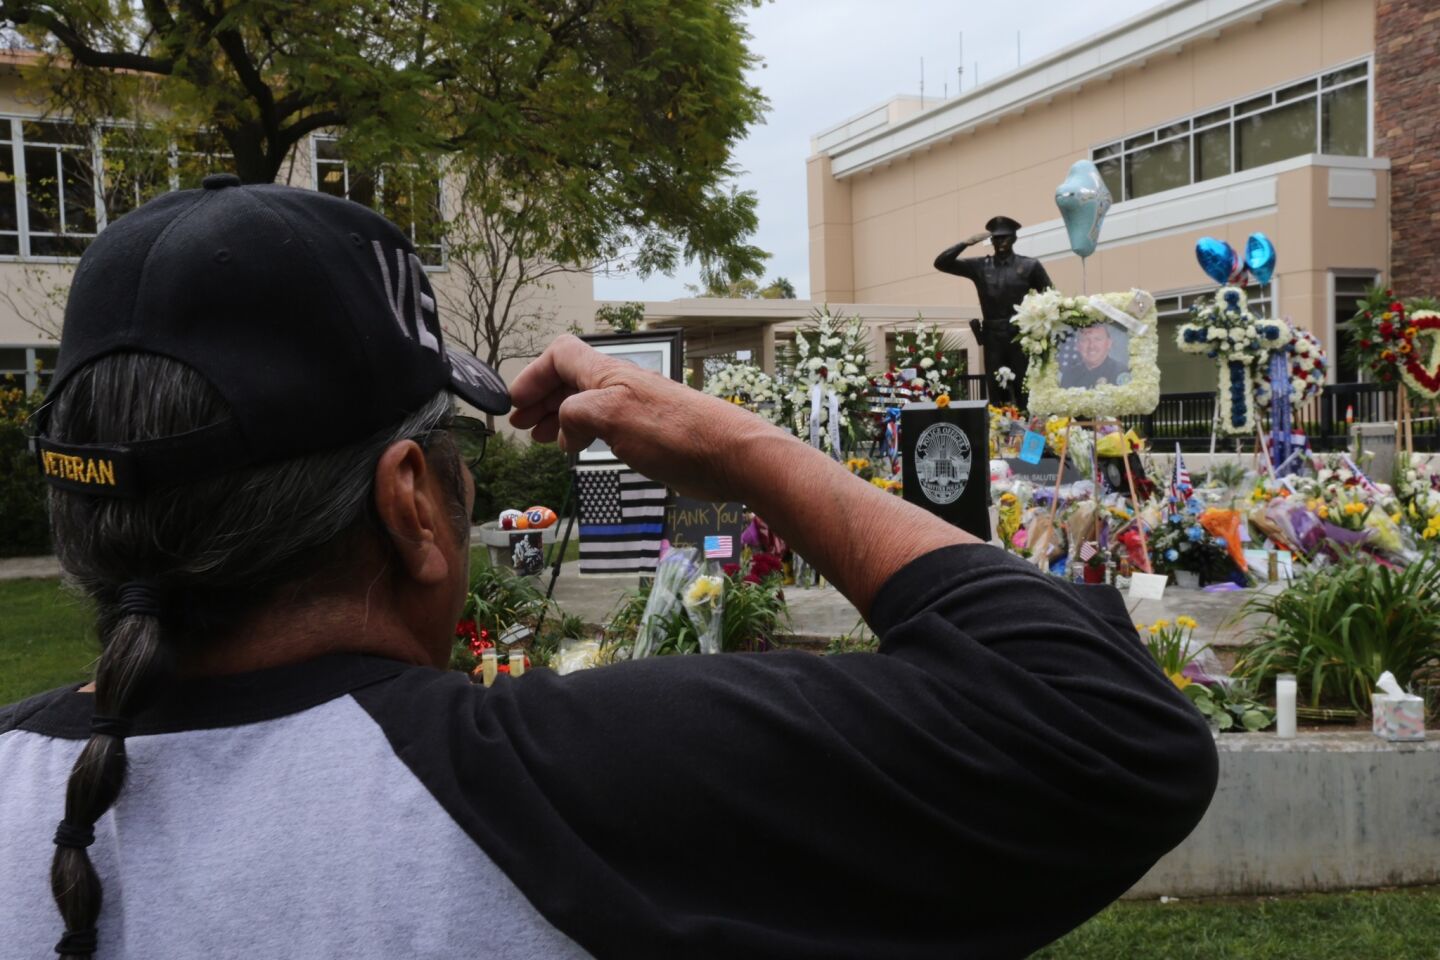 Vietnam veteran Frank Ventura salutes to pay his respects at the makeshift memorial for slain Whittier police officer Keith Boyer.